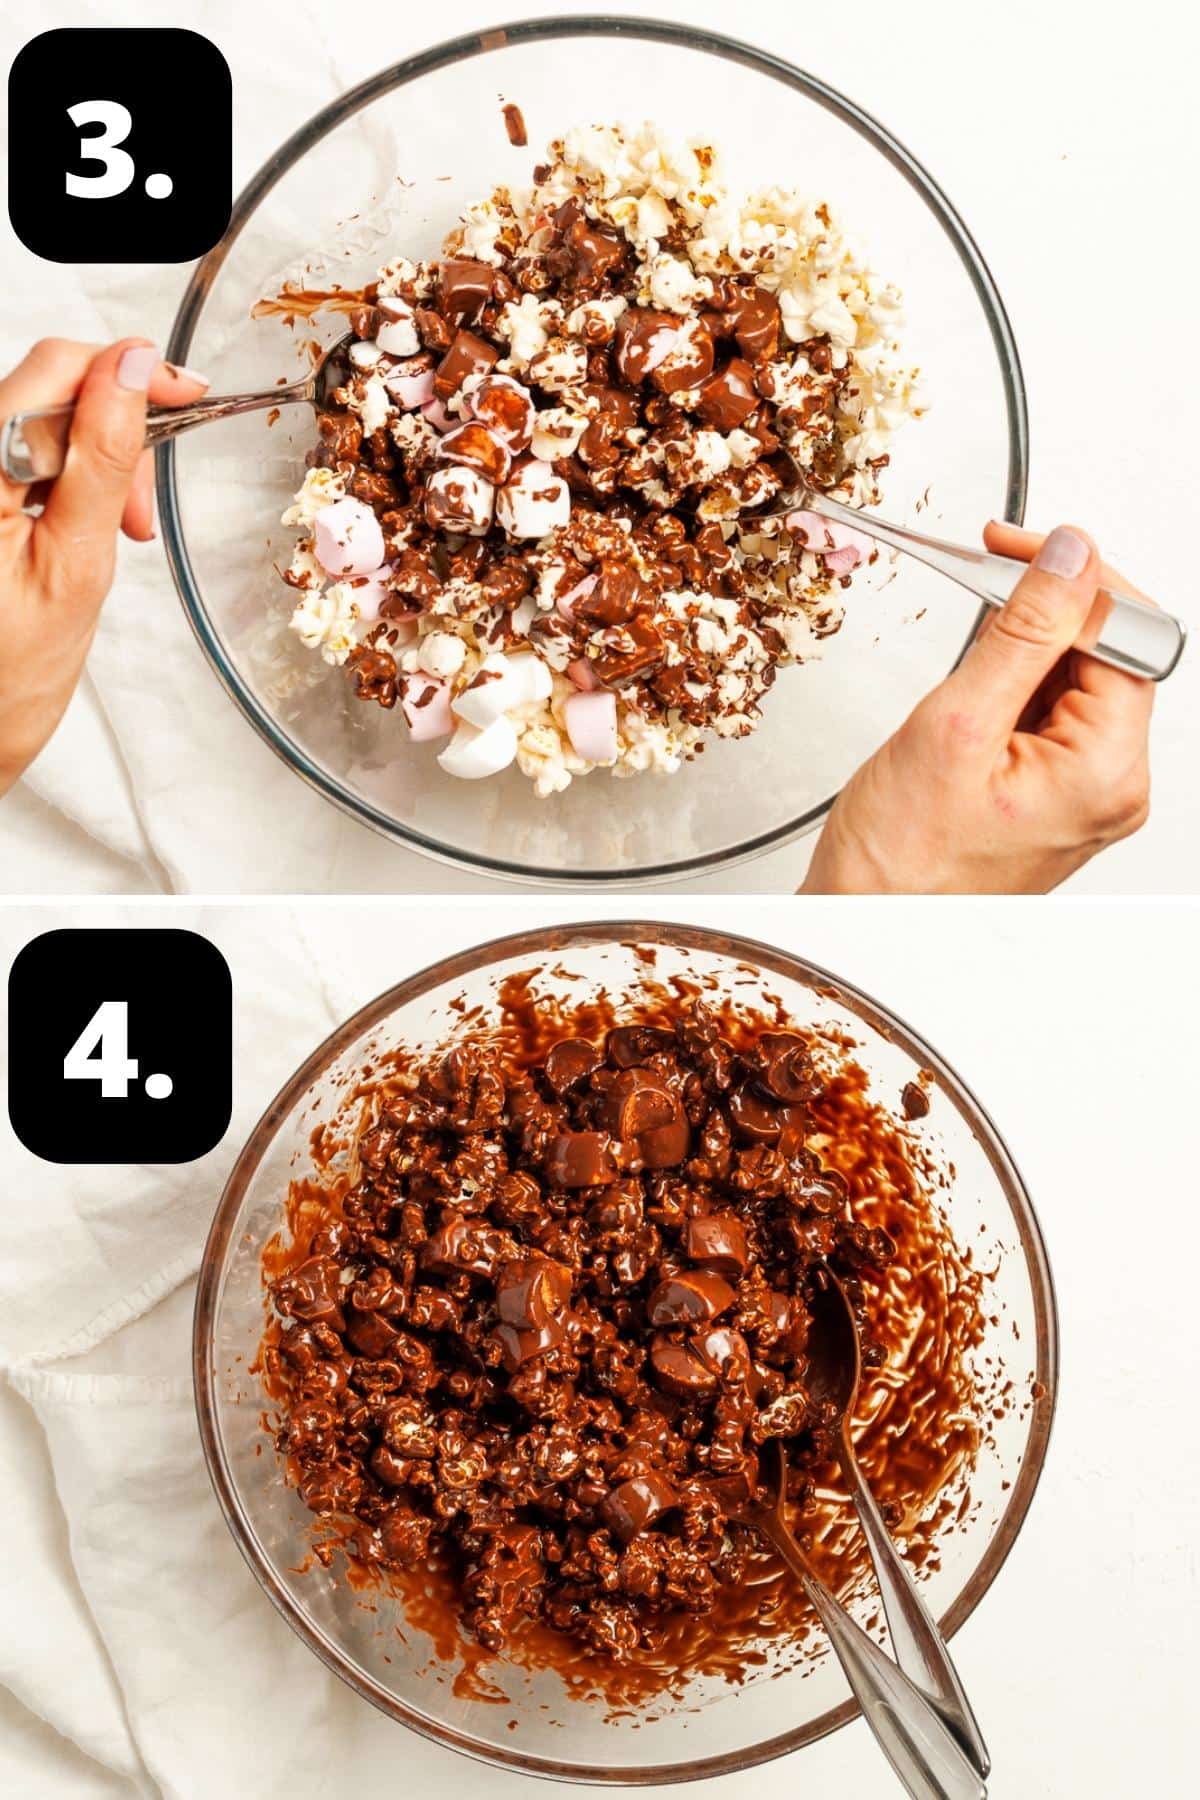 Steps 3-4 of preparing this recipe - tossing the popcorn and marshmallows with the melted chocolate and the mixture combined.